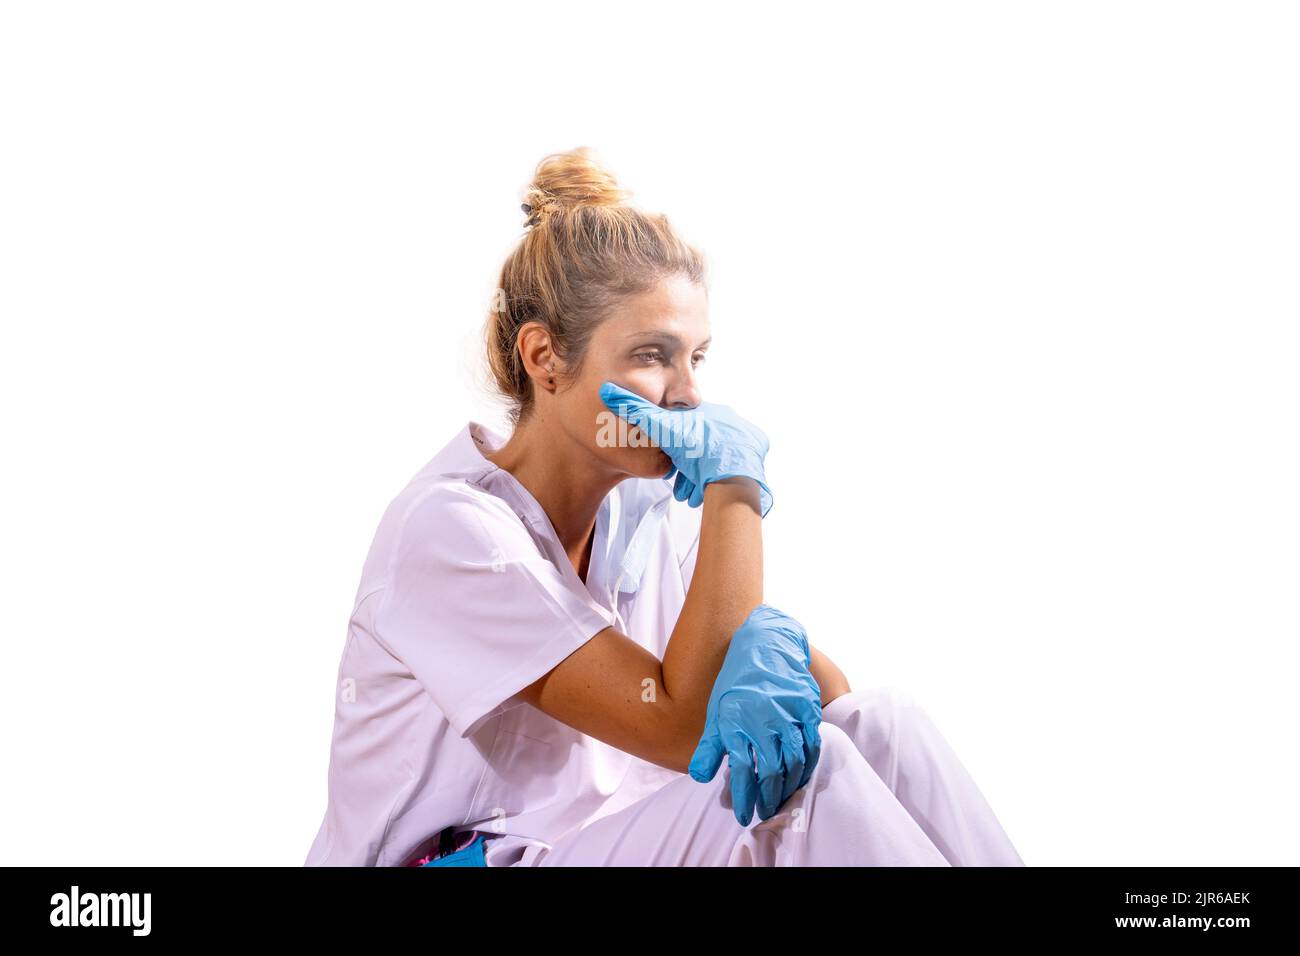 Medico girl defeated after a long day at the hospital. Stock Photo